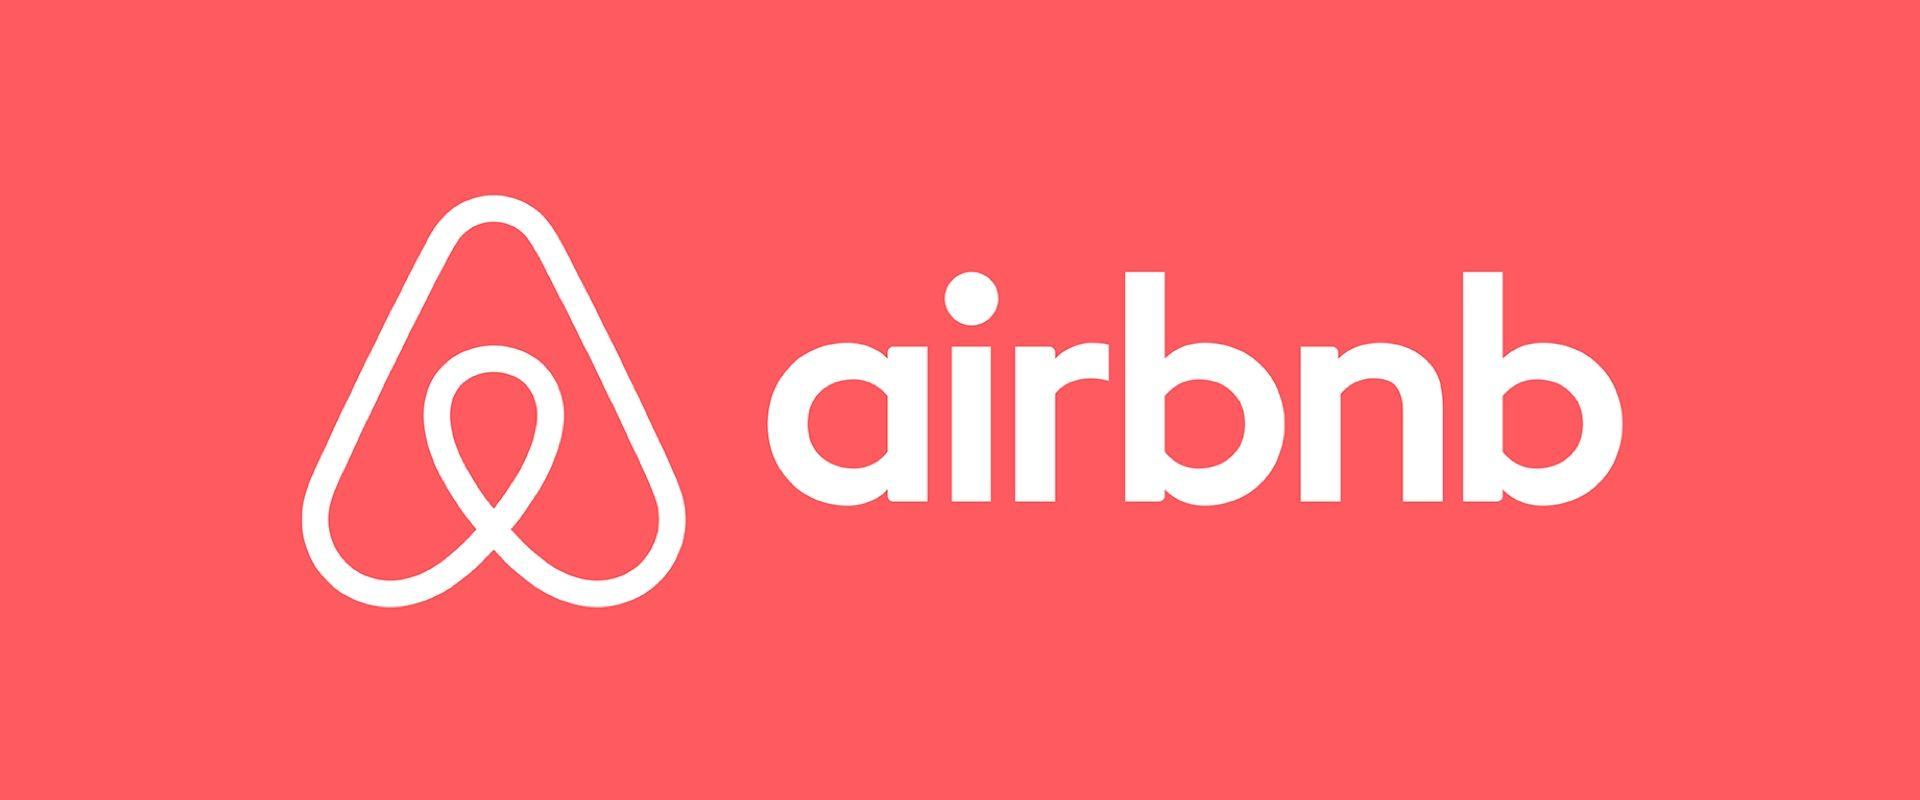 Airbnb App Logo - Airbnb: App Review - Graphic Mint